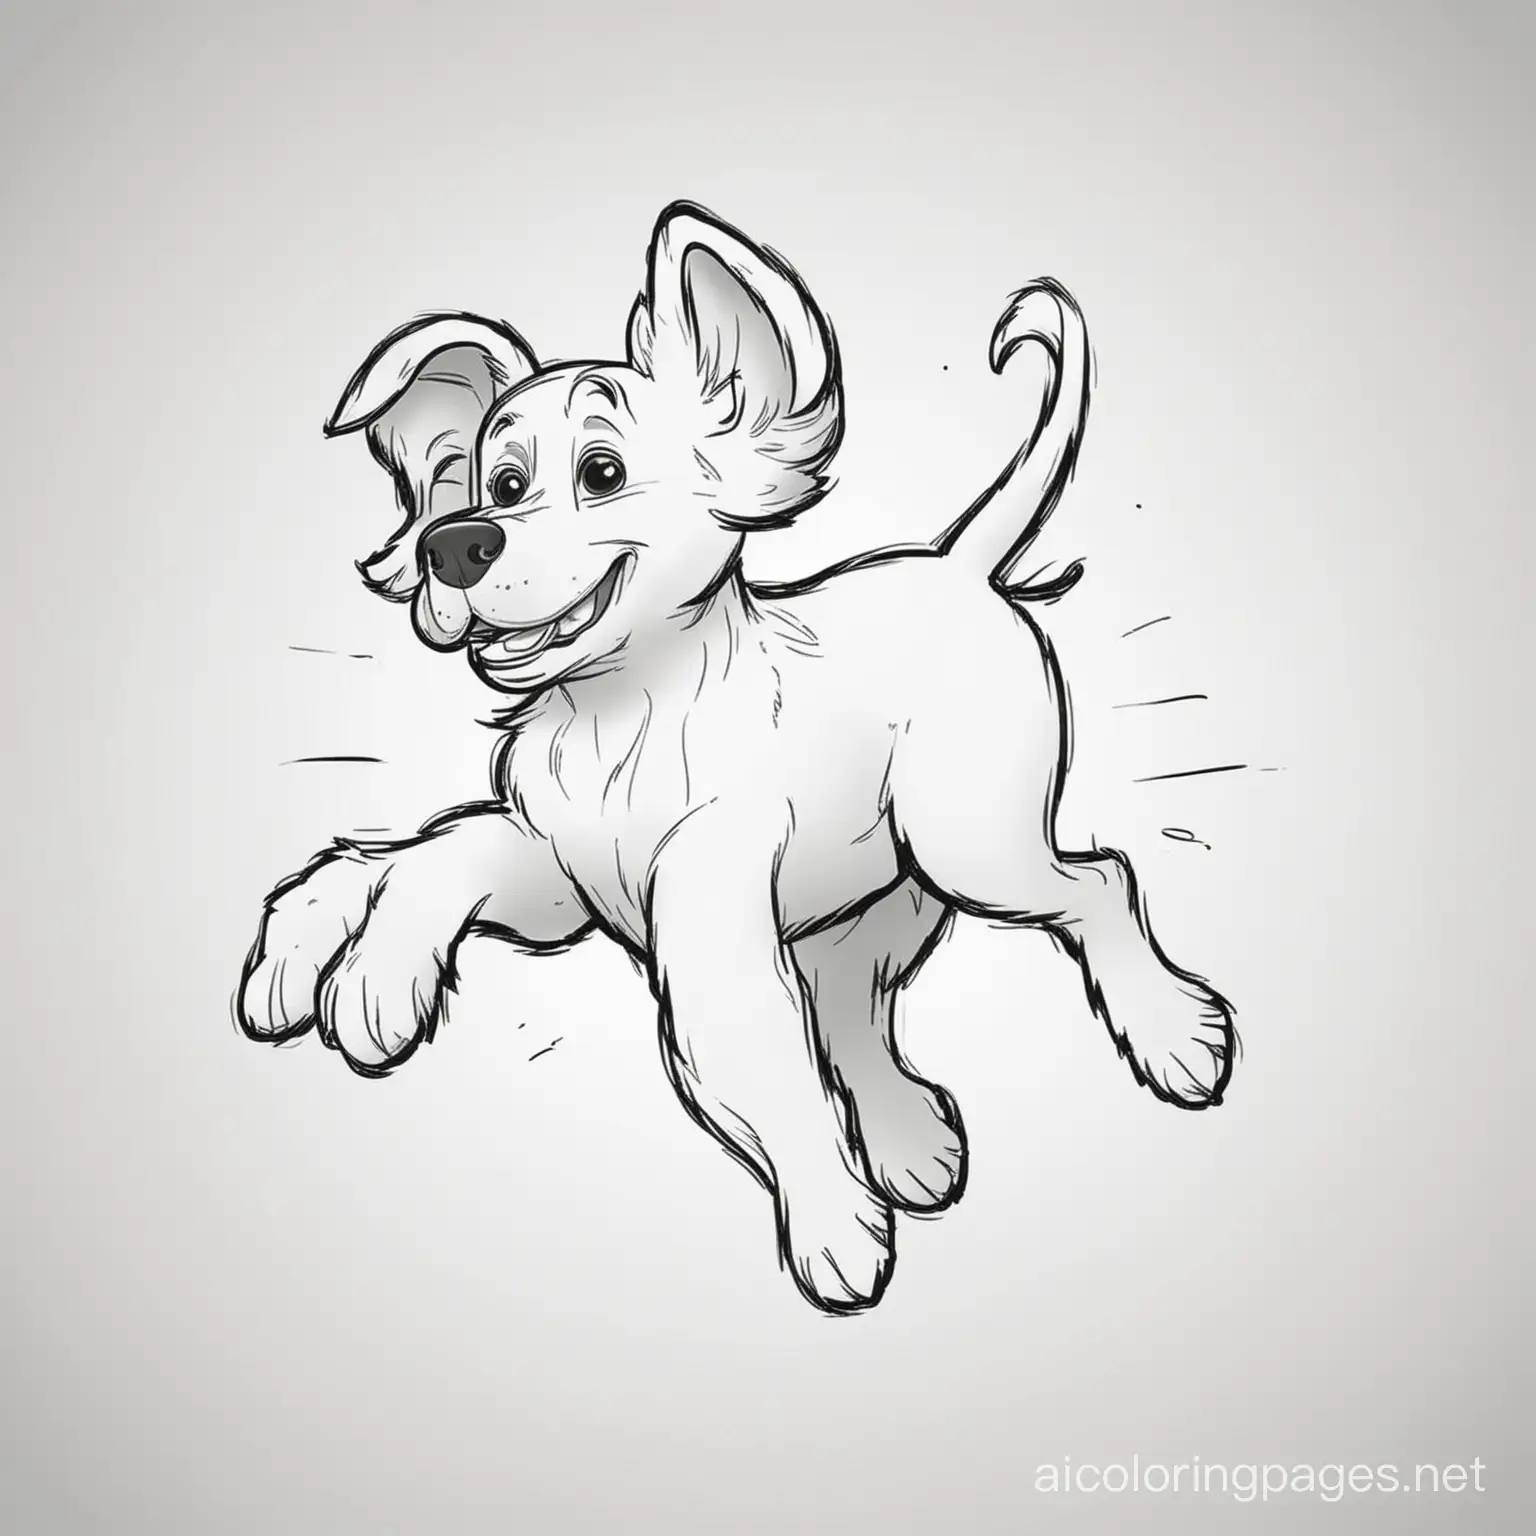 Playful-Dog-Coloring-Page-Black-and-White-Line-Art-for-Kids